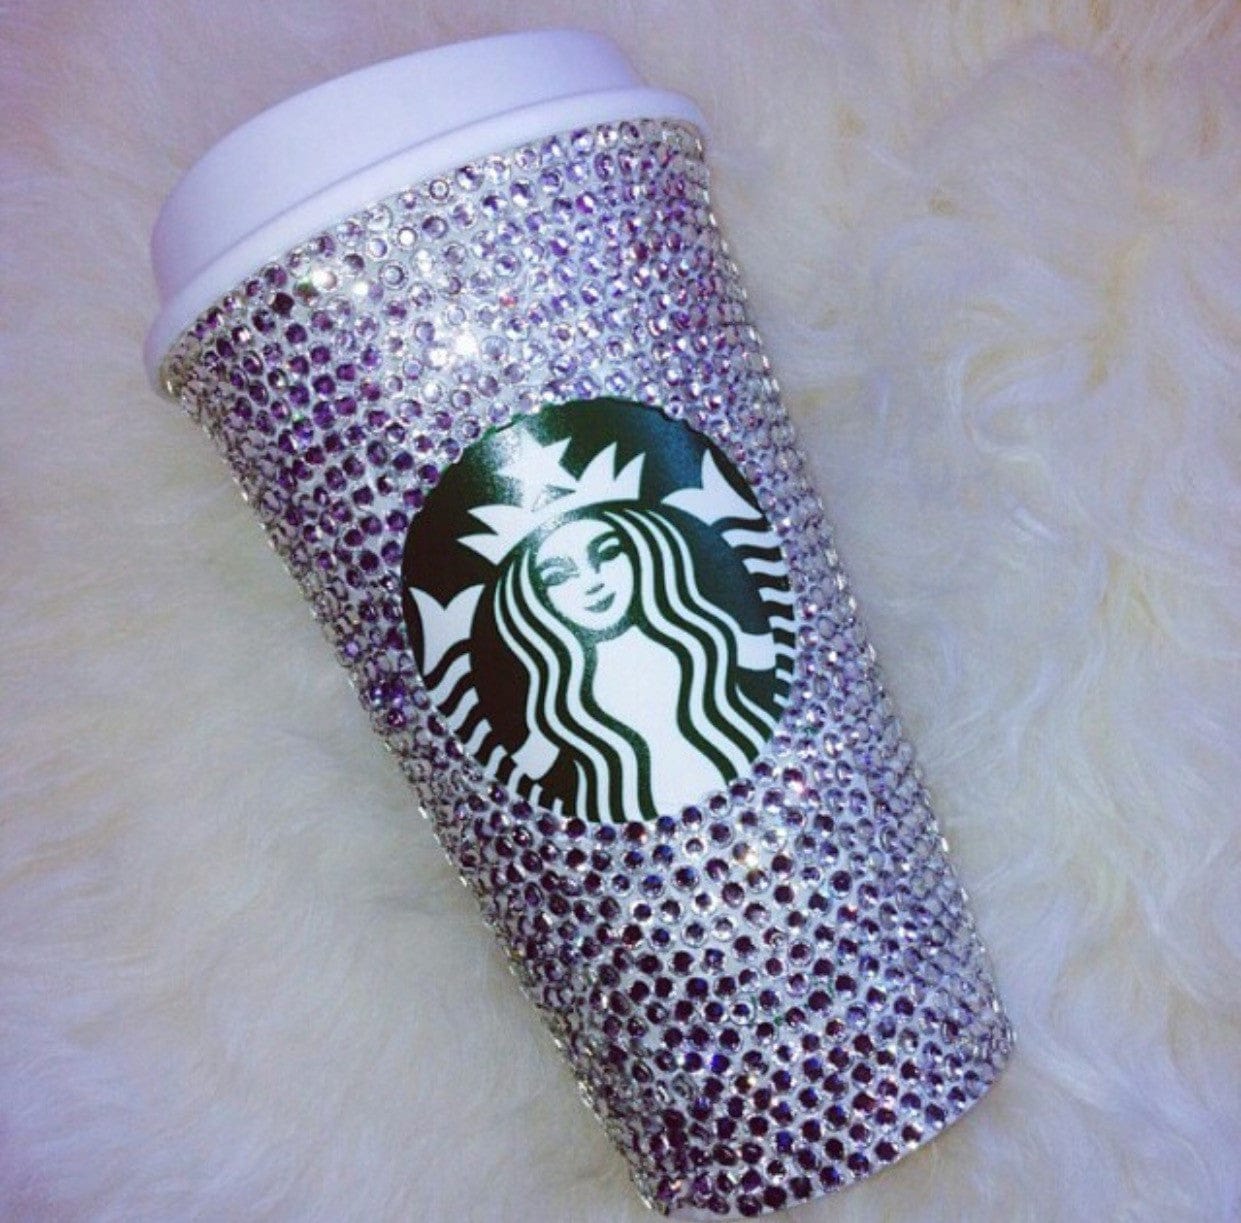 Crystalized Starbucks Hot Drink Cup Tumblers by bling addict | BlingxAddict